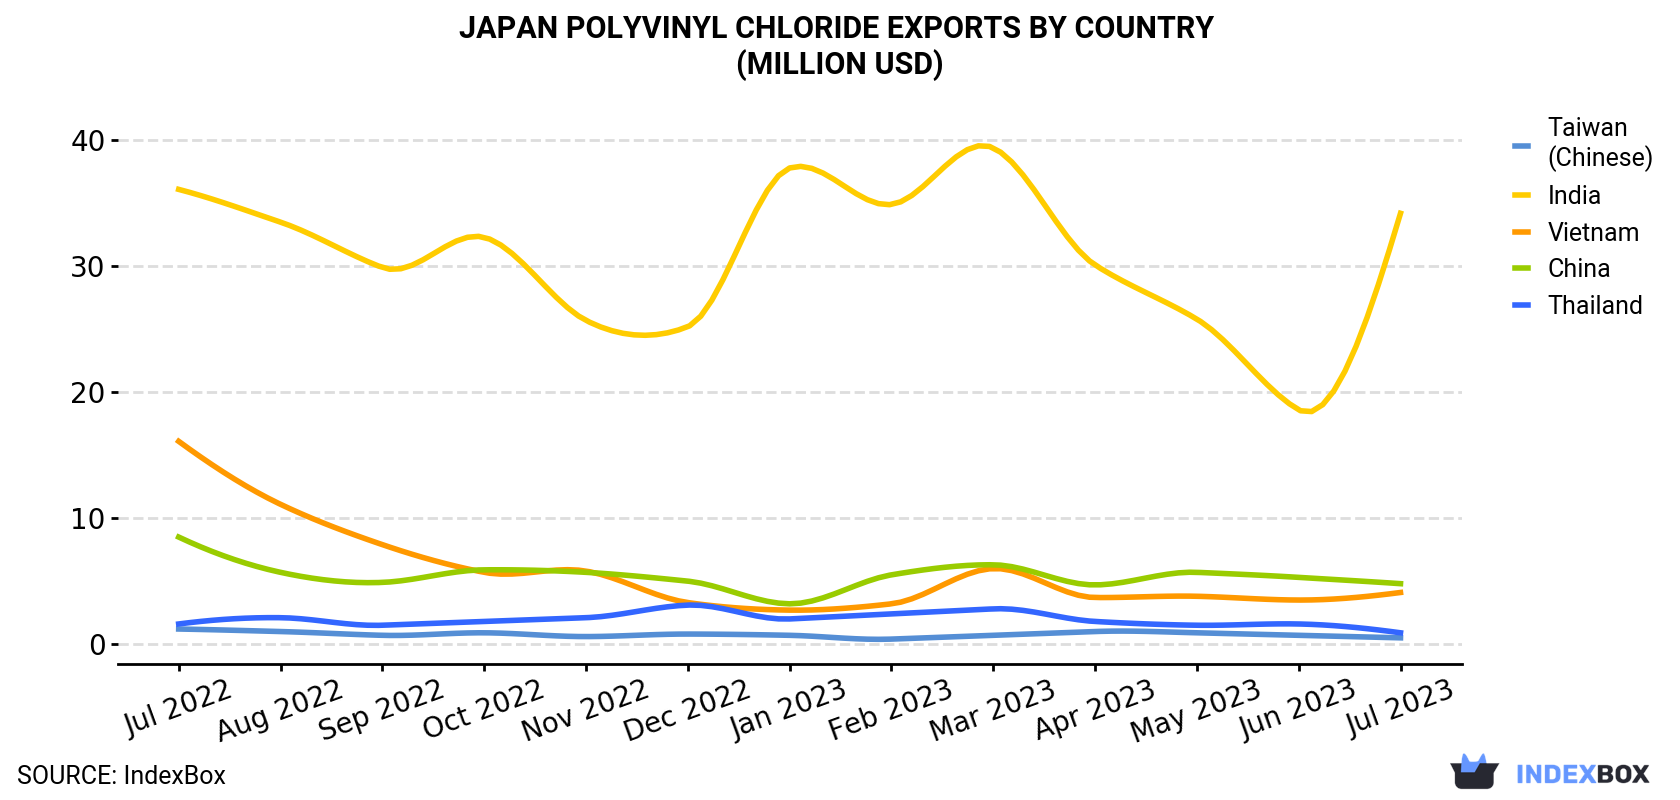 Japan Polyvinyl Chloride Exports By Country (Million USD)